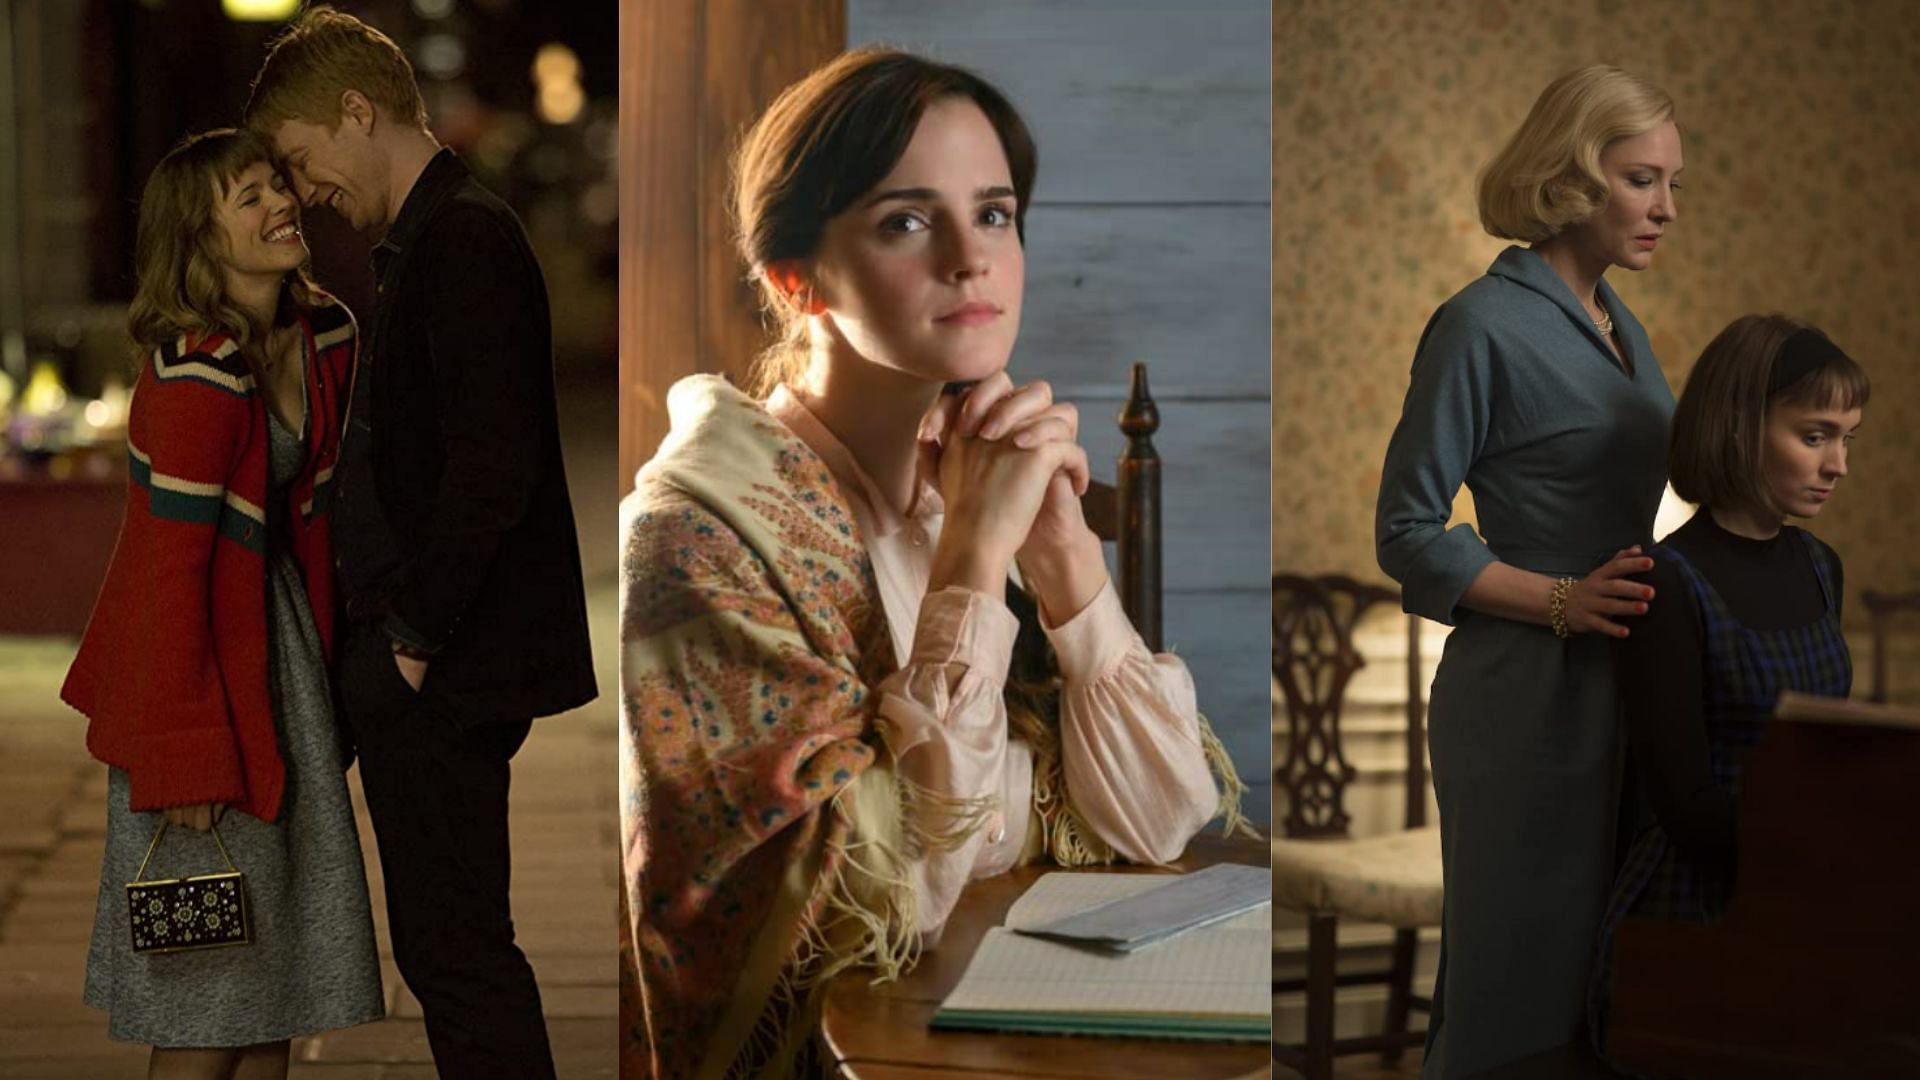 Stills from About Time, Little Women and Carol (Images Via IMDb)